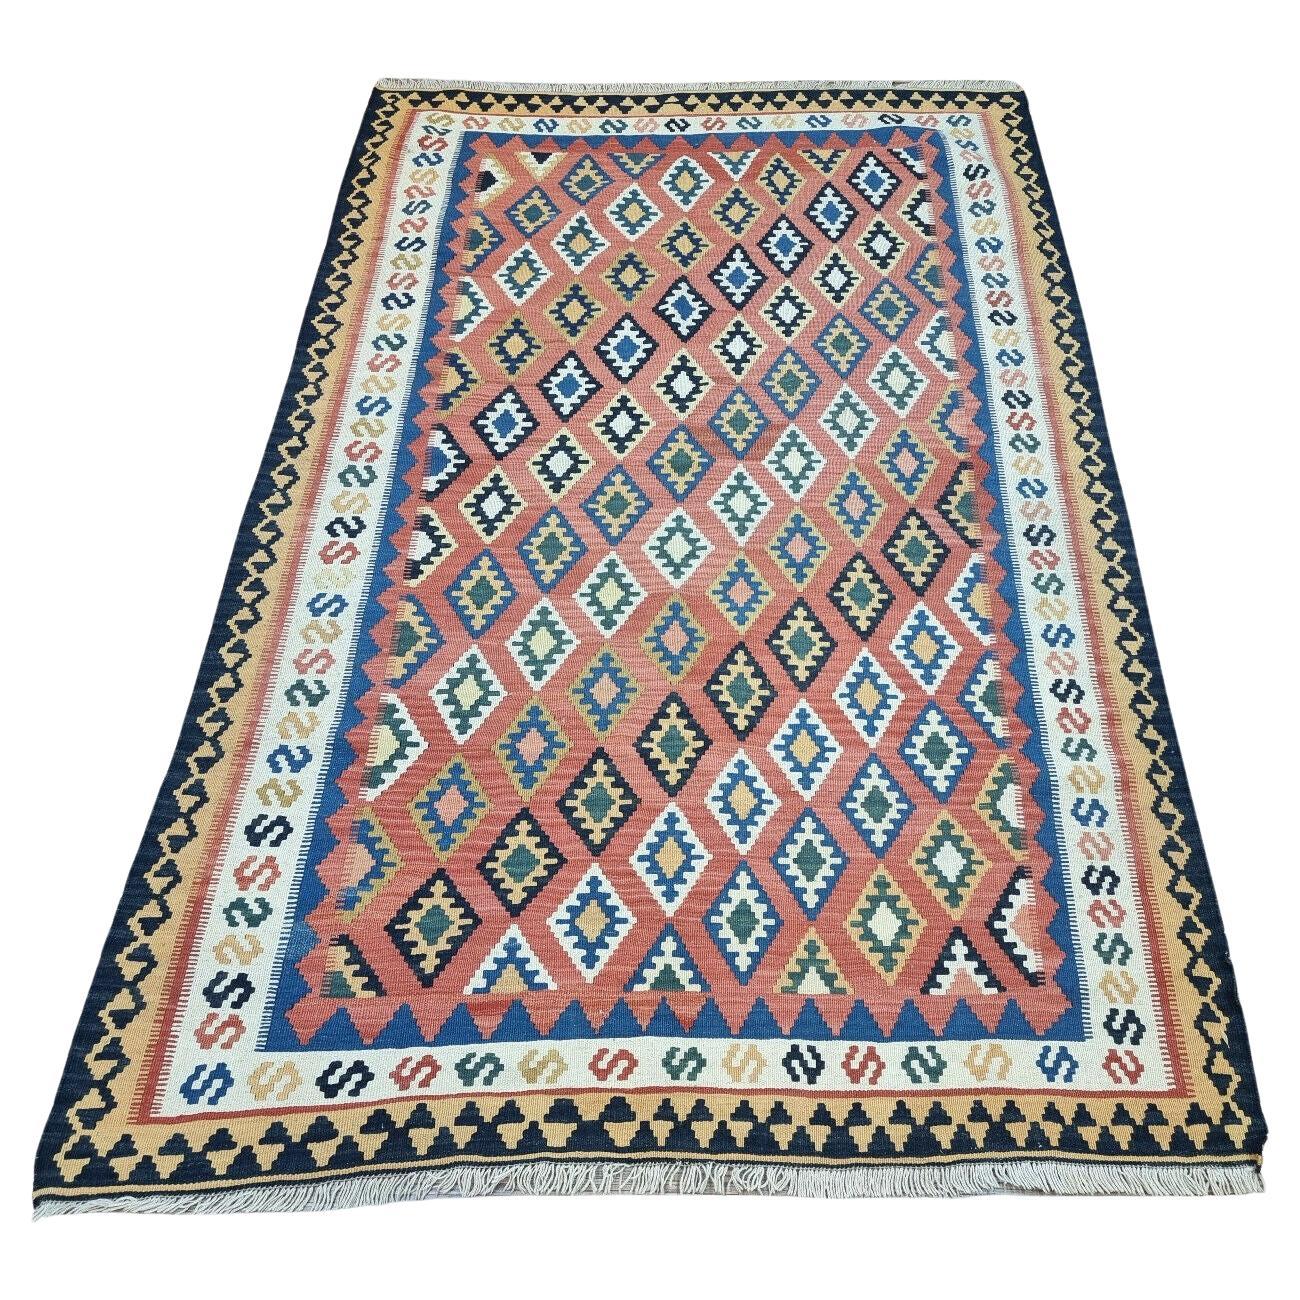 Handmade Vintage Persian Style Ardabil Kilim Rug 4.9' x 7.2', 1970s - 1D91 For Sale